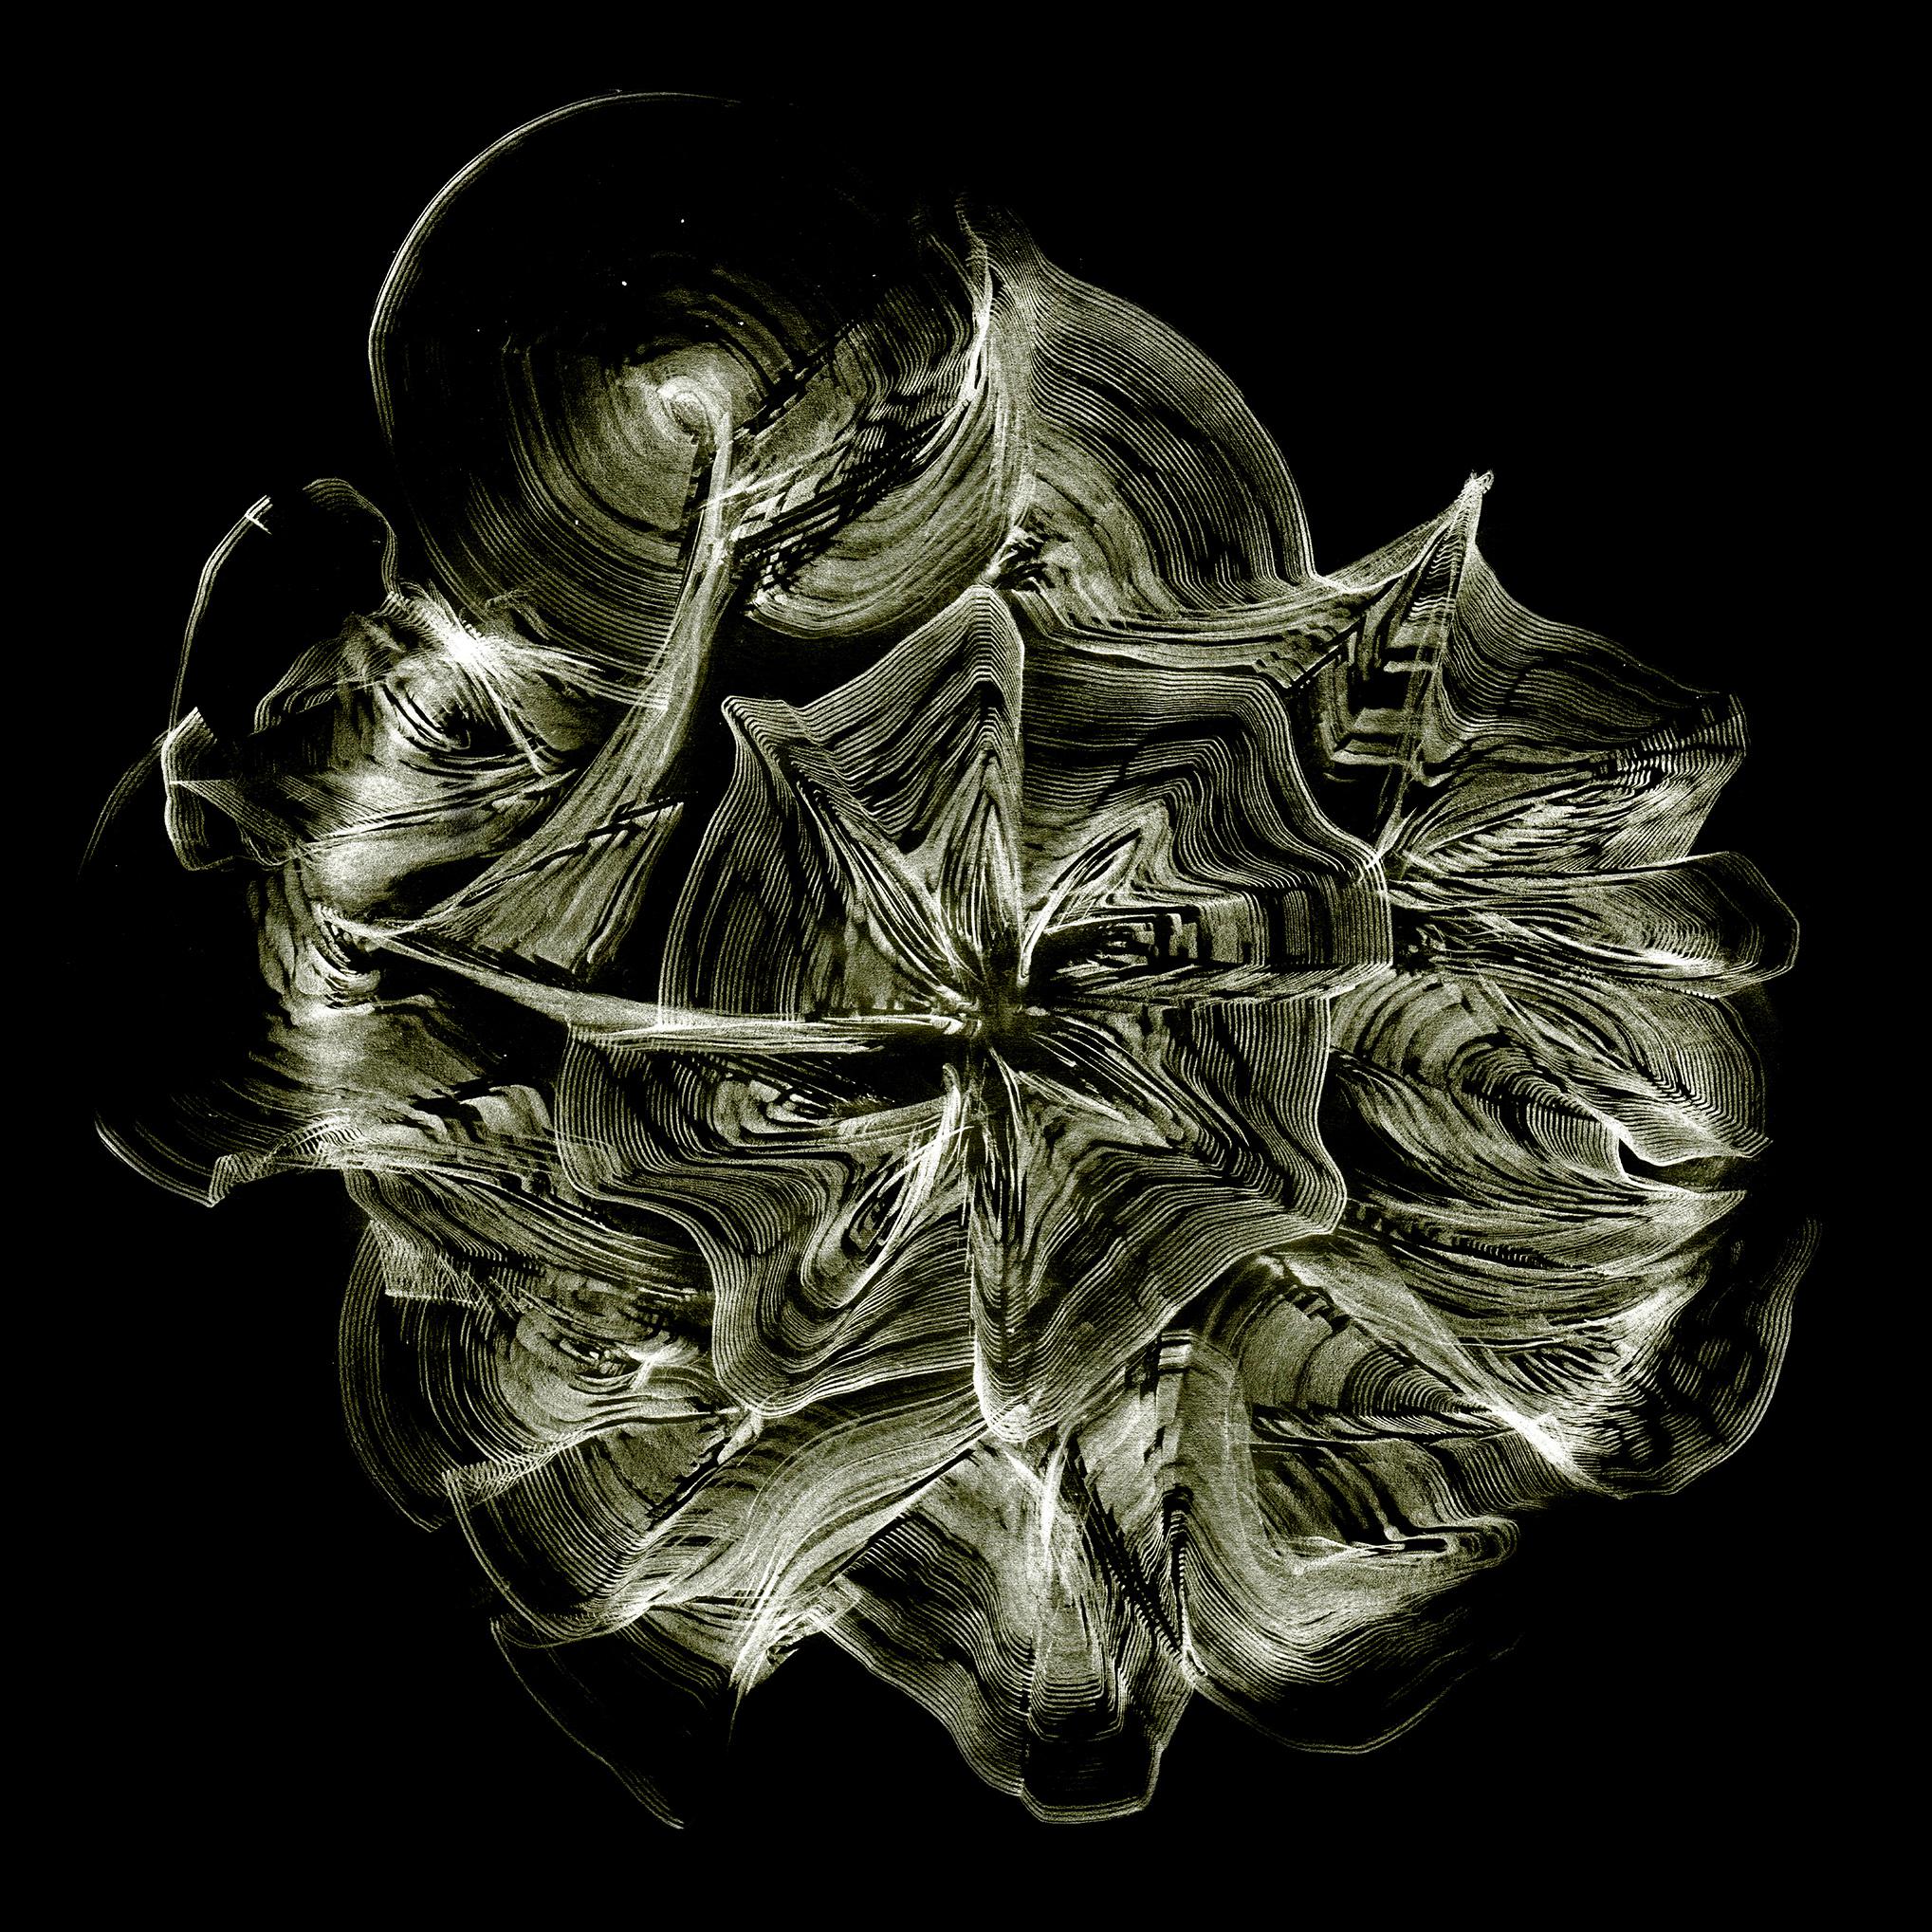 Volodymyr Zayichenko Abstract Drawing - Black and white digital print based on graphite drawing 125x125cm by Zayichenko